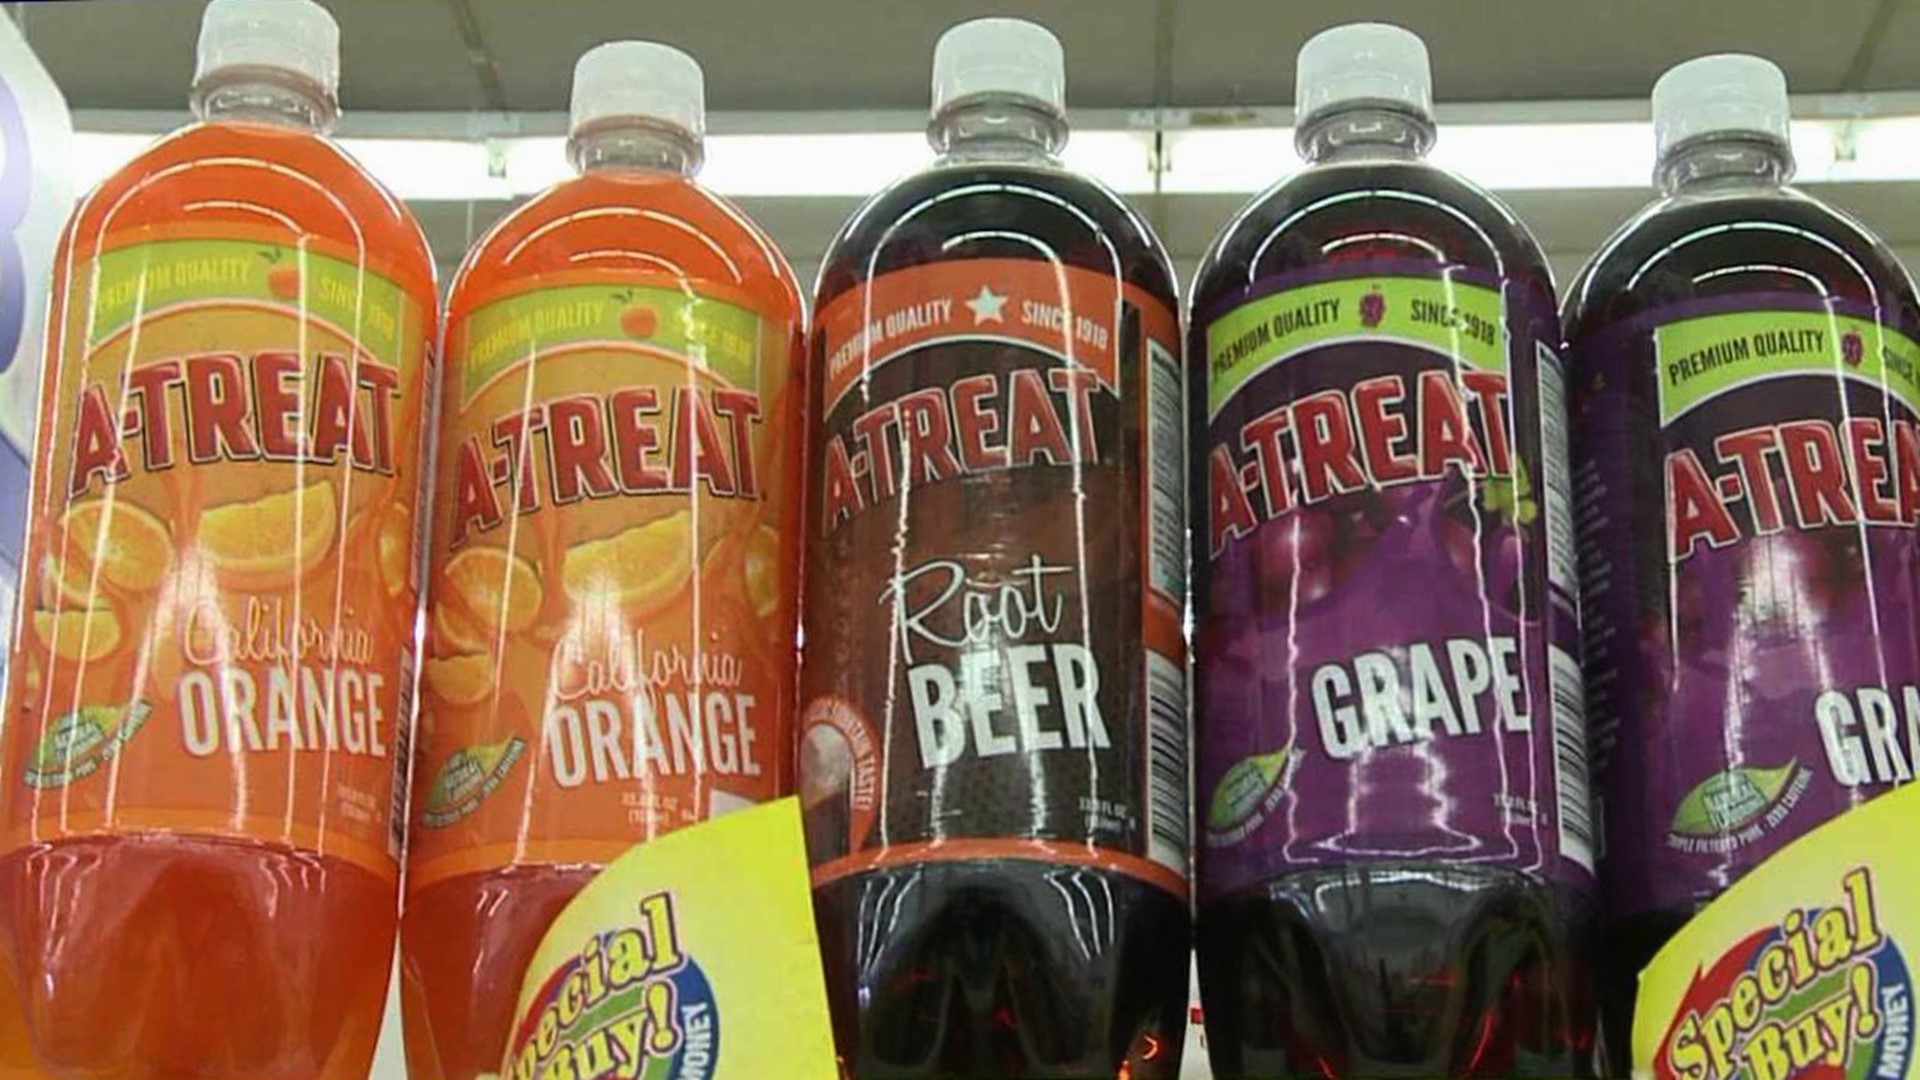 A-Treat Bottling Company Purchased